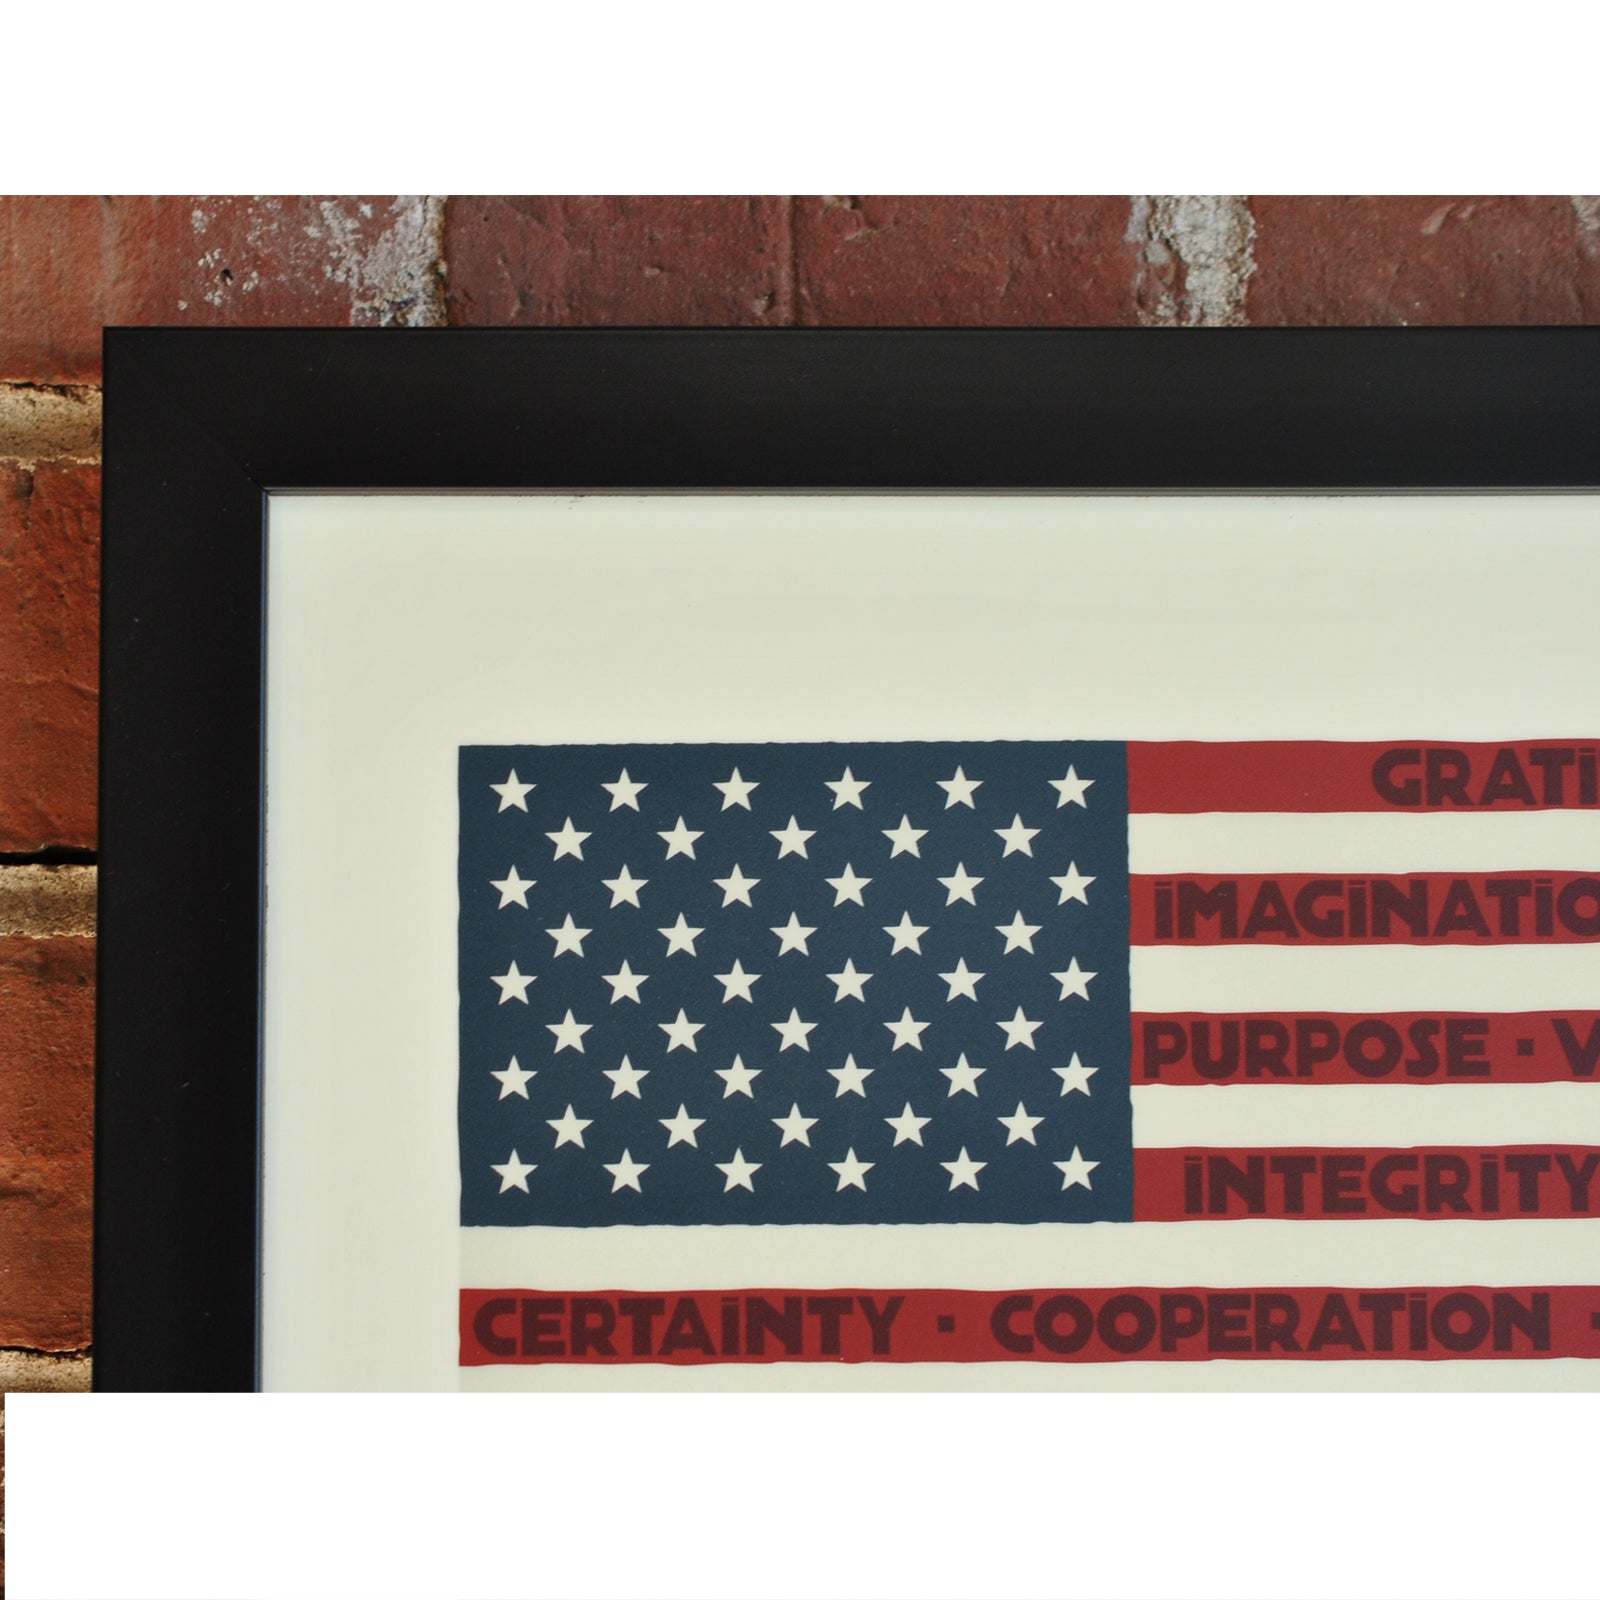 GIVE IT YOUR BEST! USA Flag Art Print 8" x 10" Framed